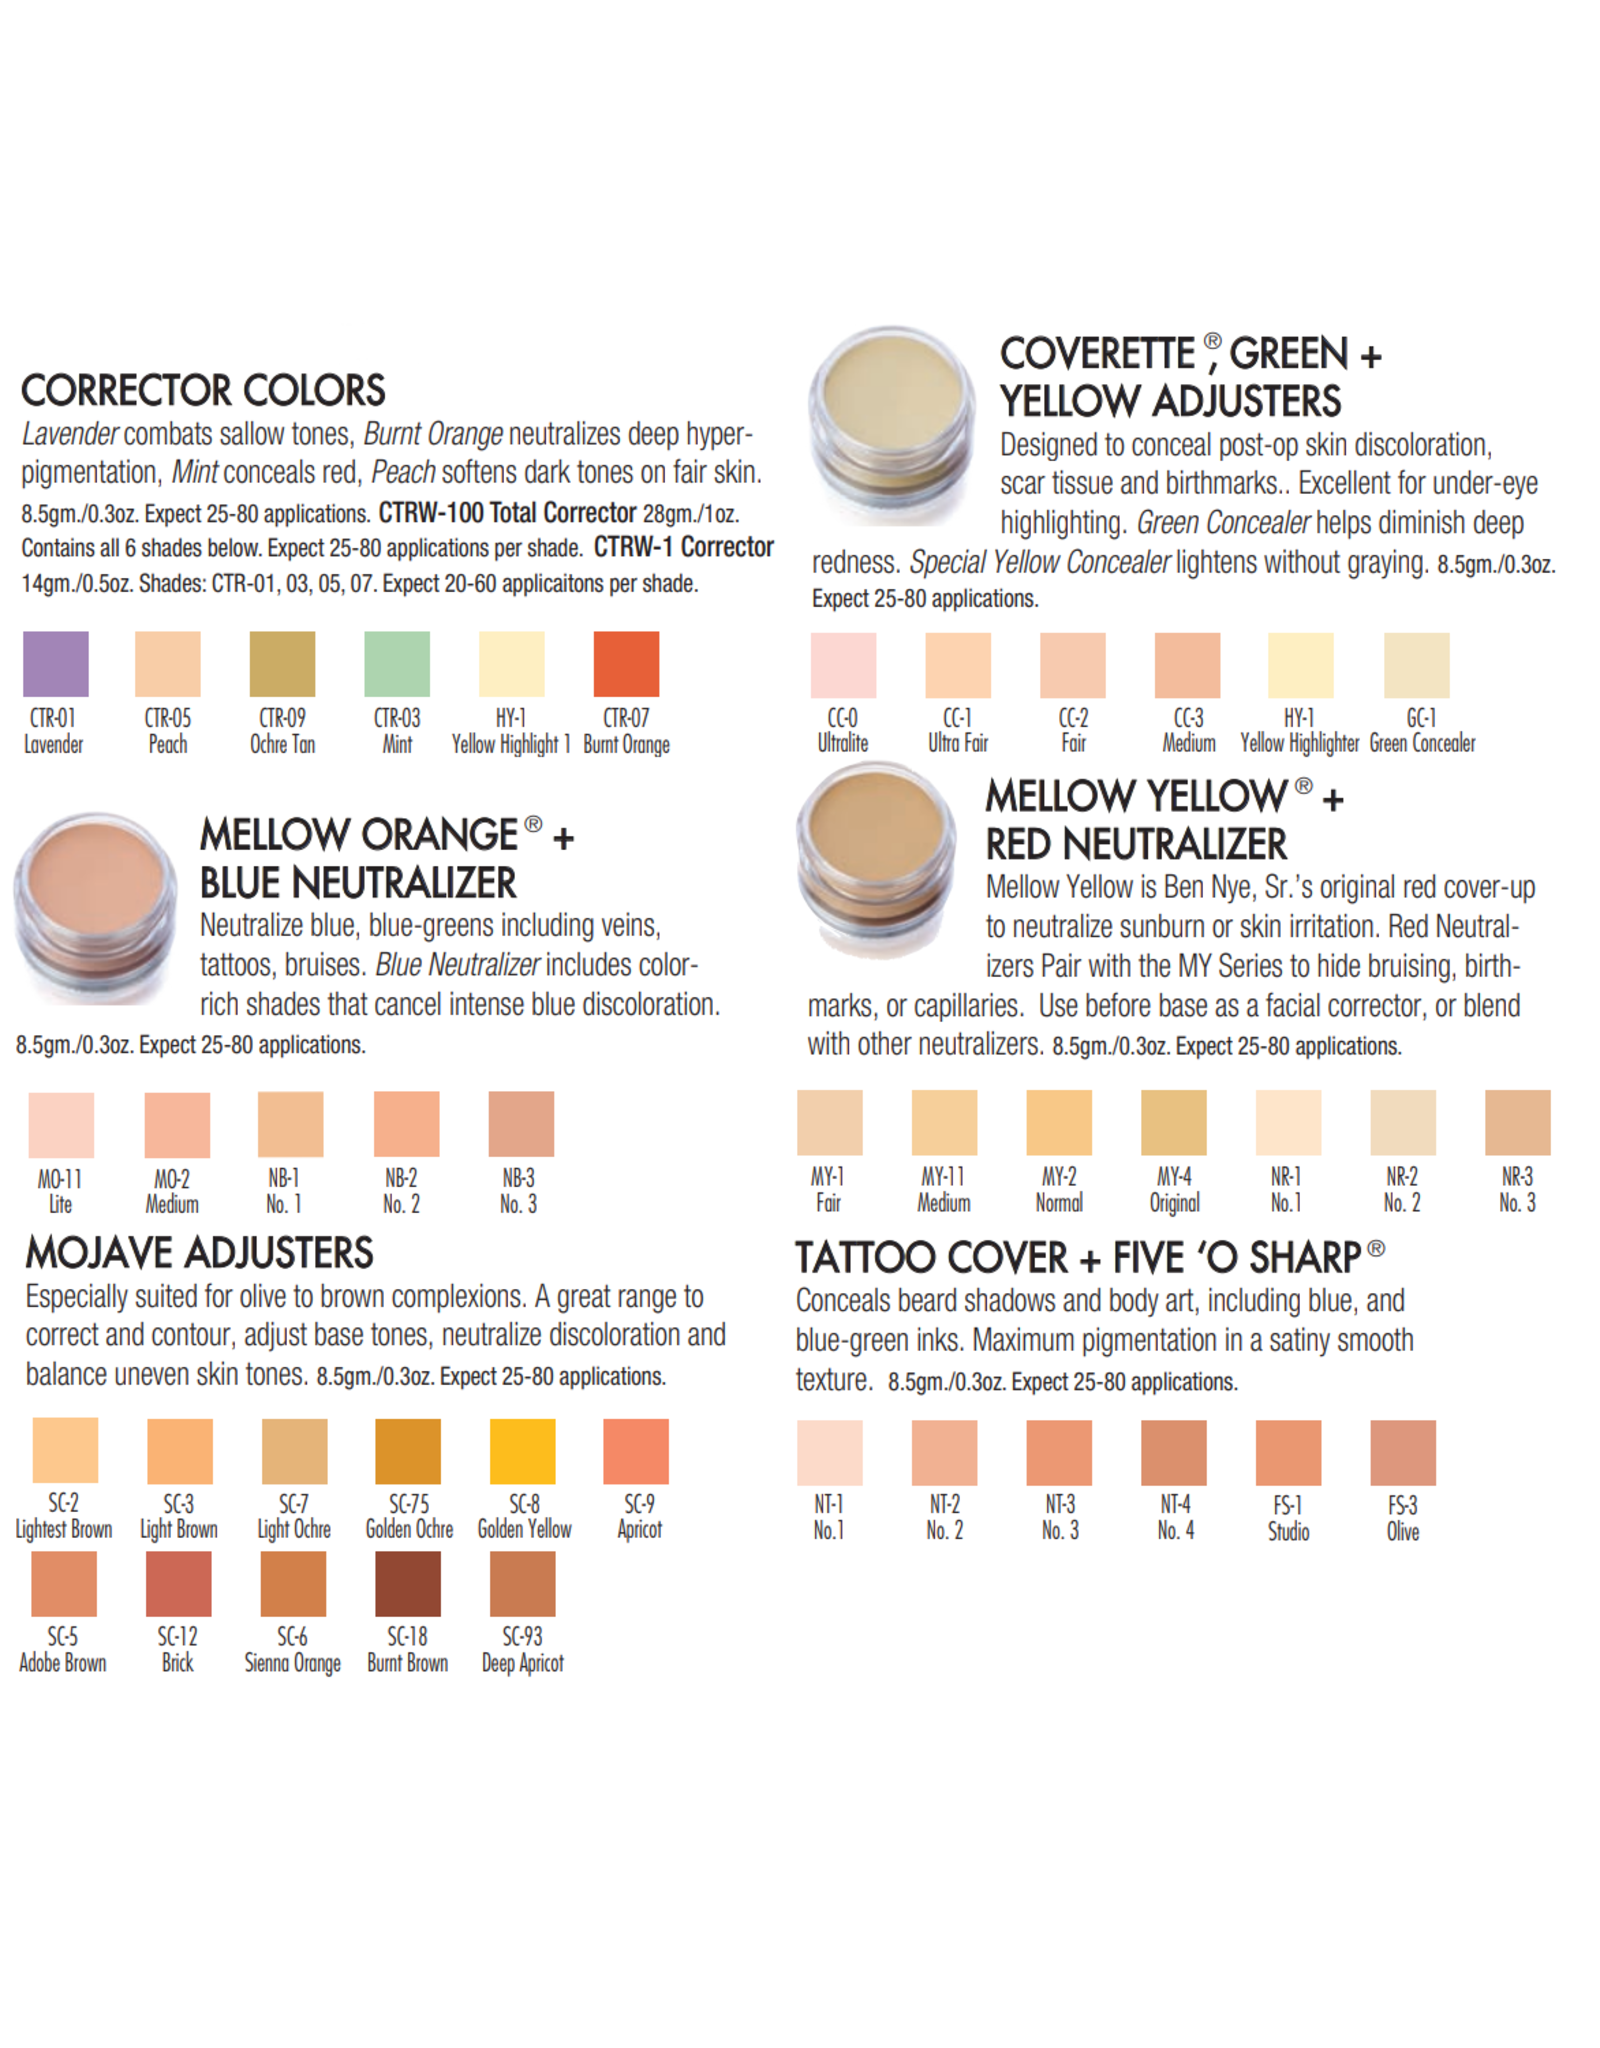 Makeup That Cover Up Tattoos  Best Concealer and Foundation for Tattoos   Allure